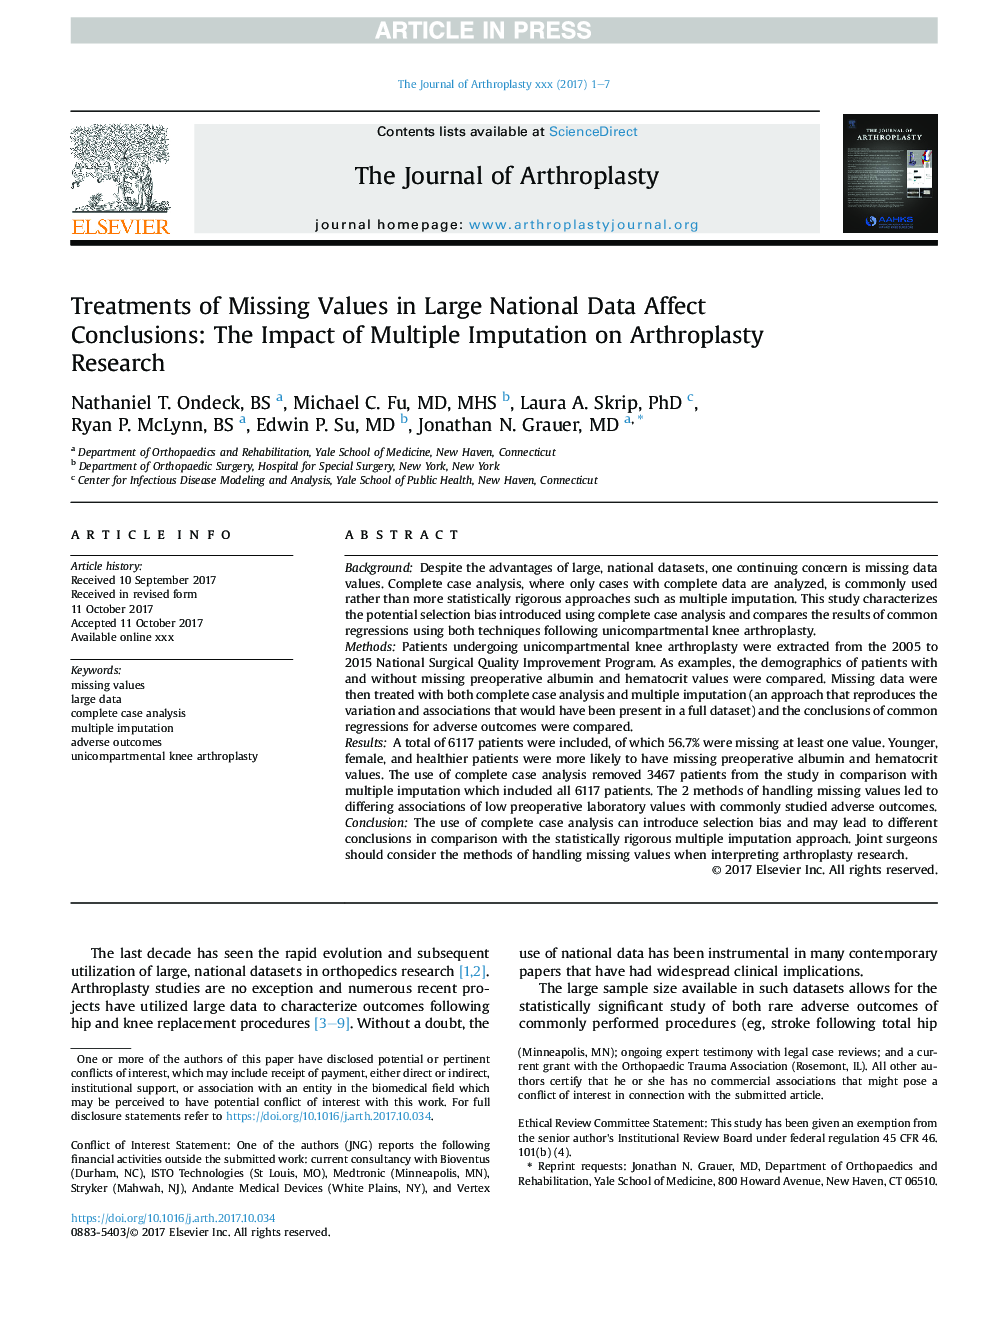 Treatments of Missing Values in Large National Data Affect Conclusions: The Impact of Multiple Imputation on Arthroplasty Research